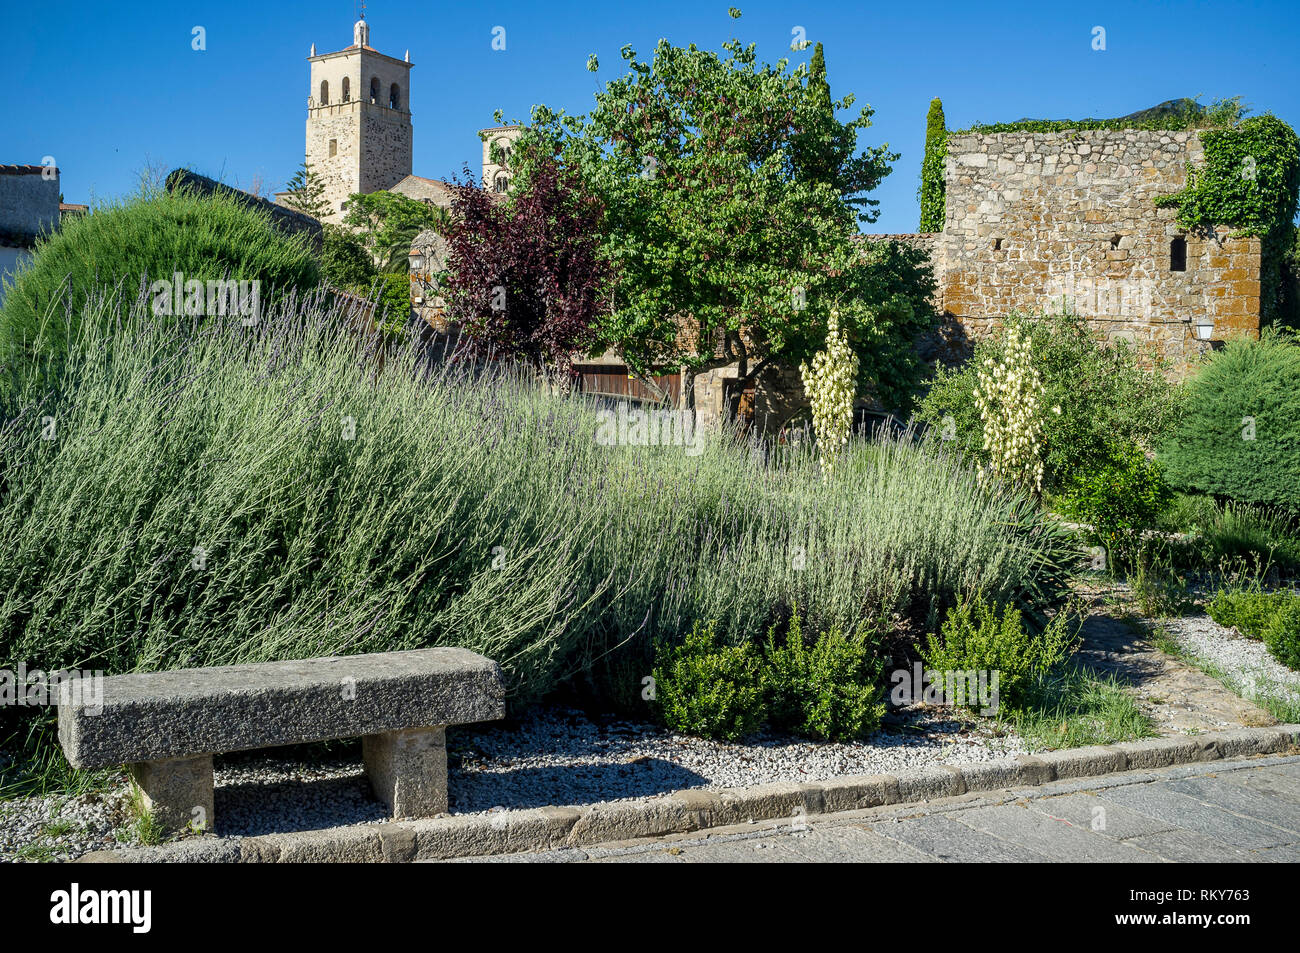 A quiet corner in the town of Trujillo, nr. Caceres, Spain, birthplace of  the conquistador Francisco Pizarro. Stock Photo